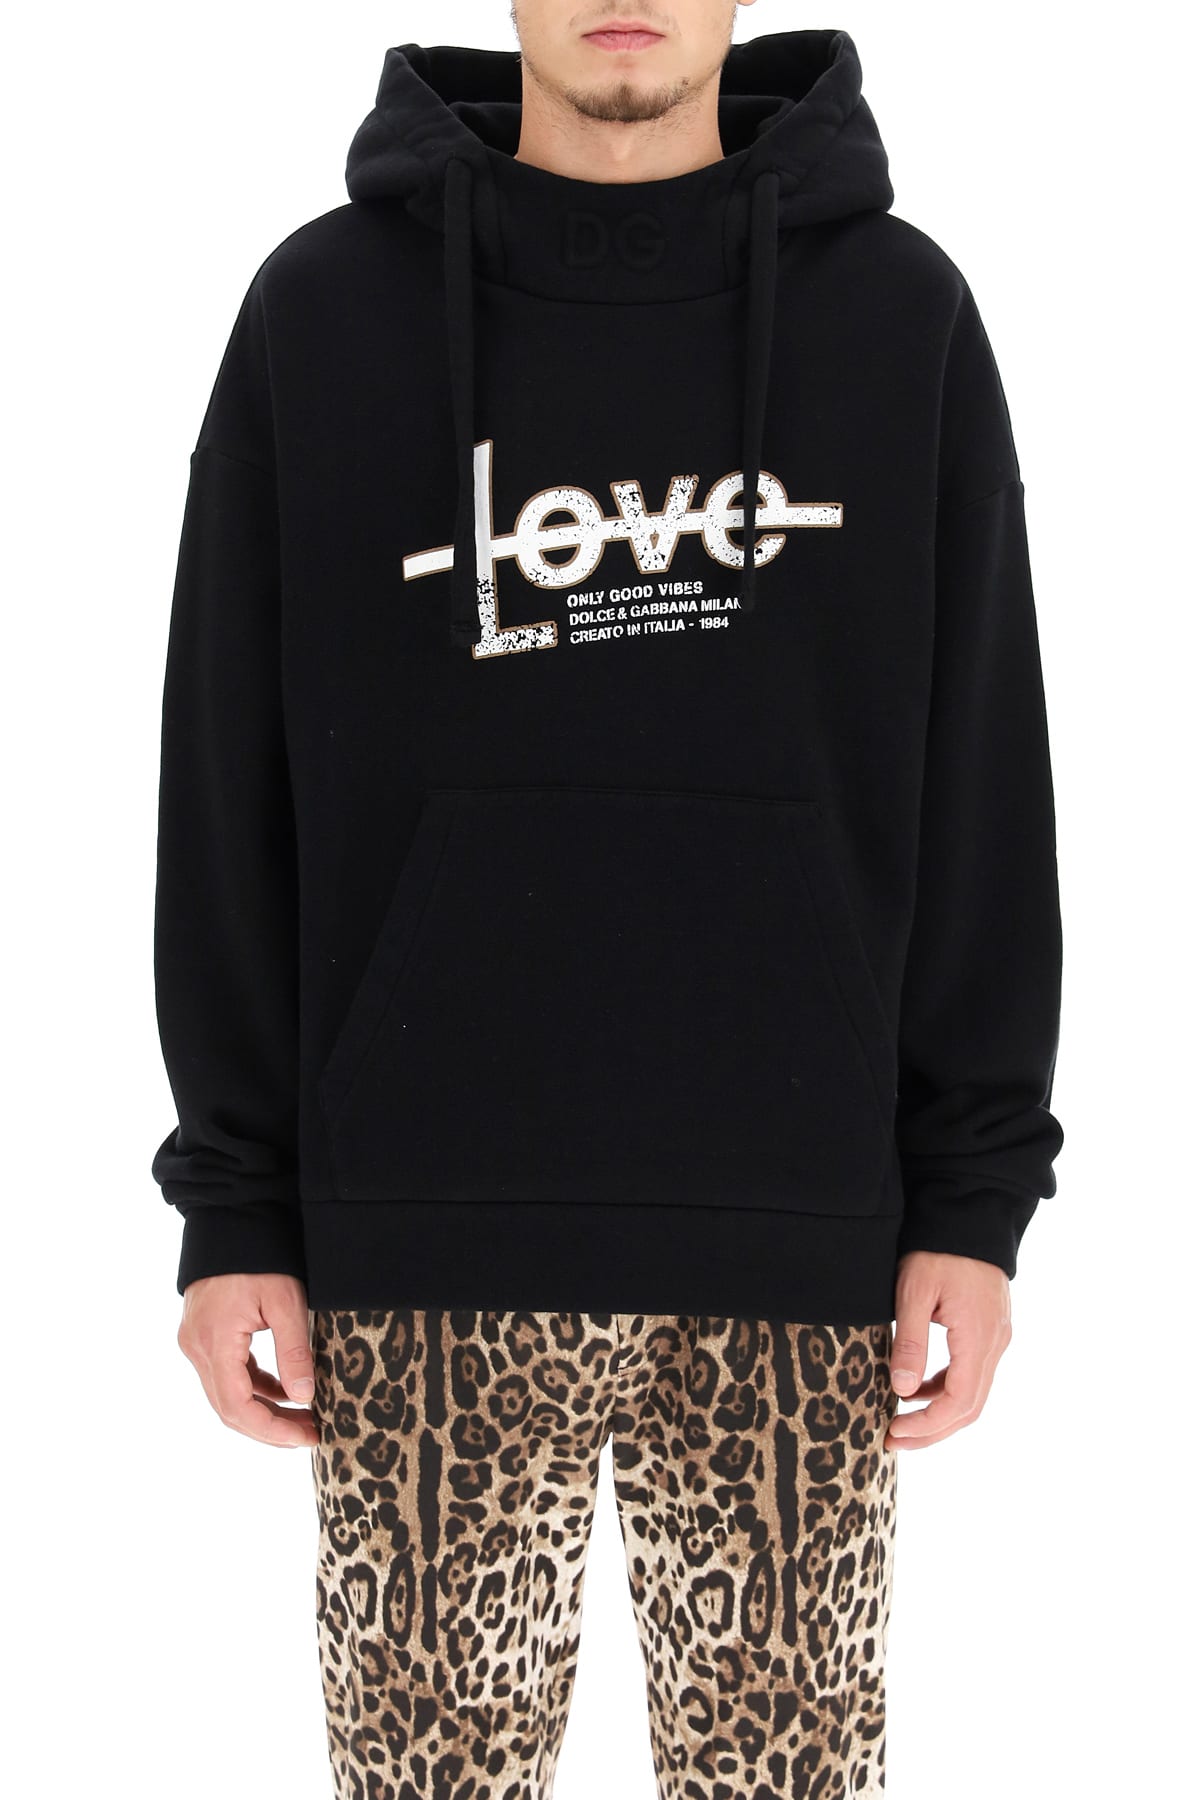 Dolce & Gabbana 'only Good Vibes' Print Hoodie In Black | ModeSens